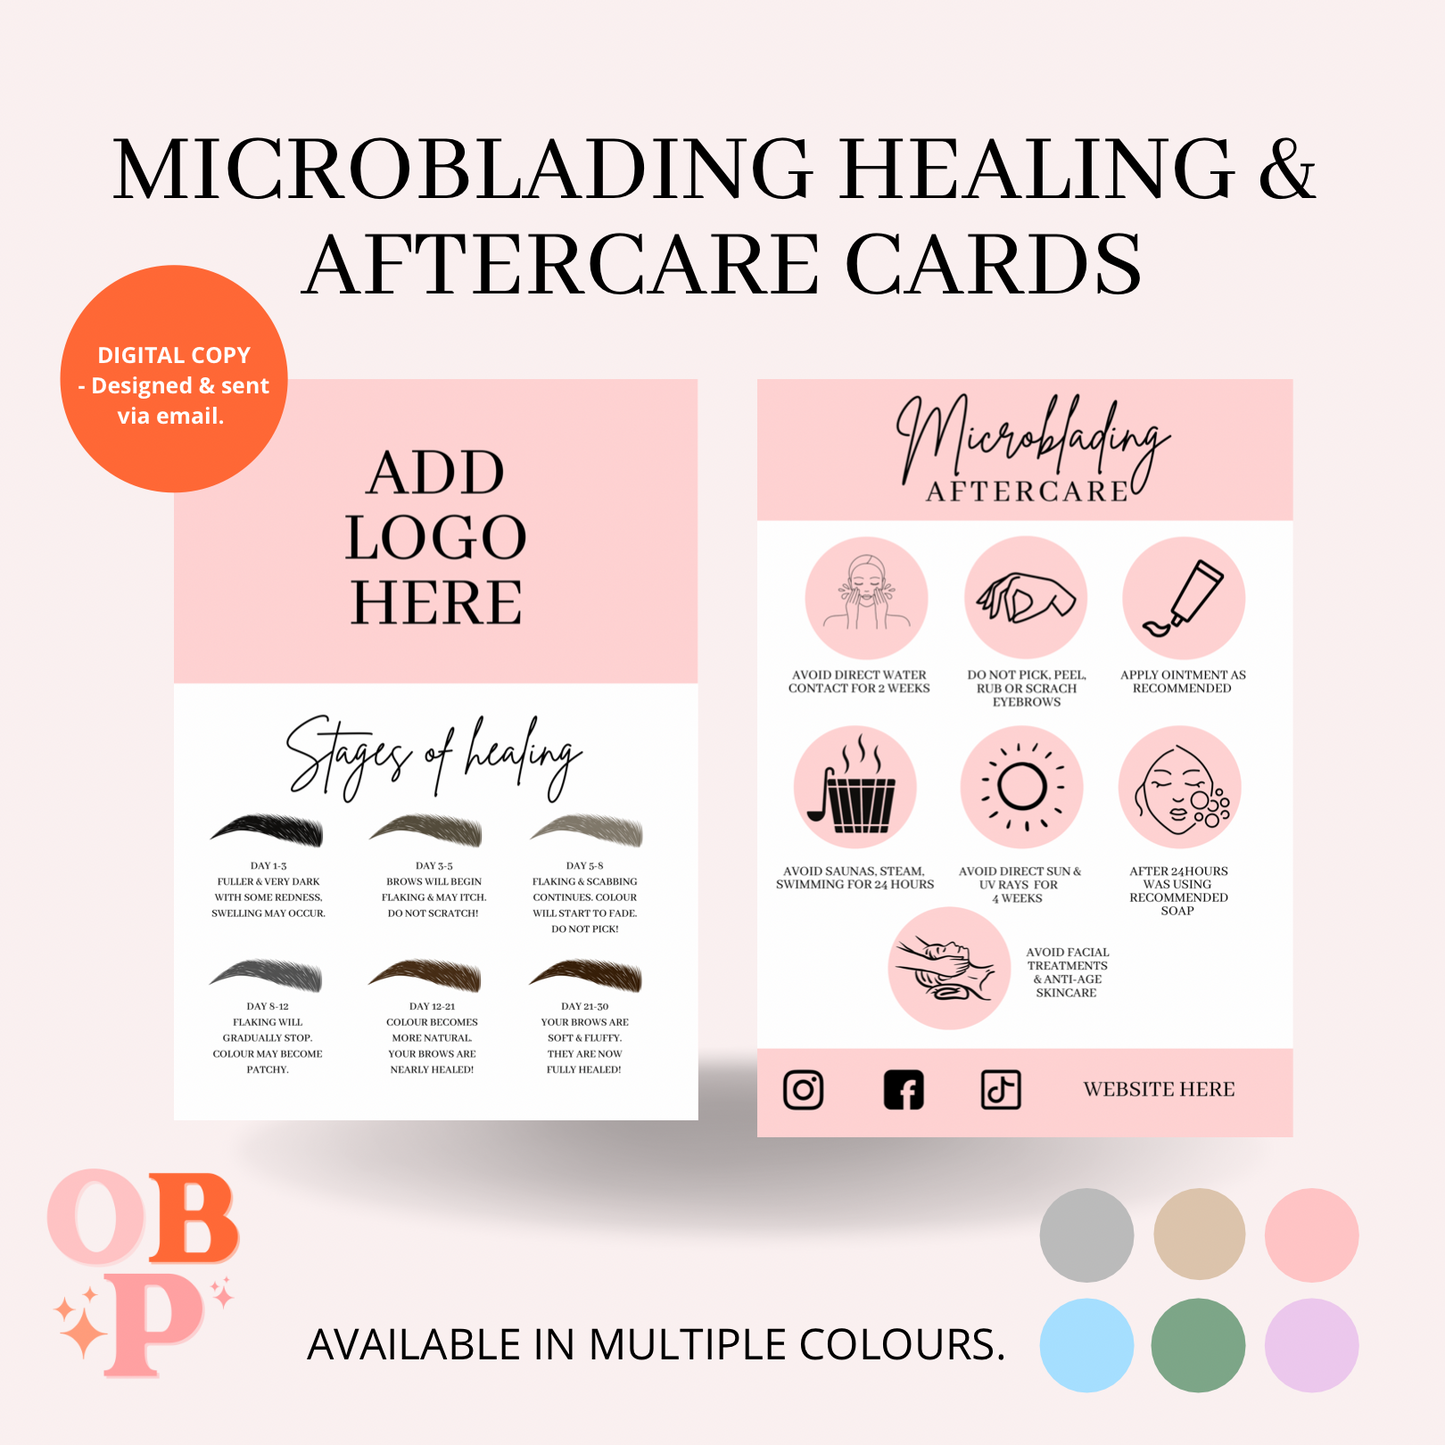 Microblading Healing & Aftercare Cards (Digital Download)